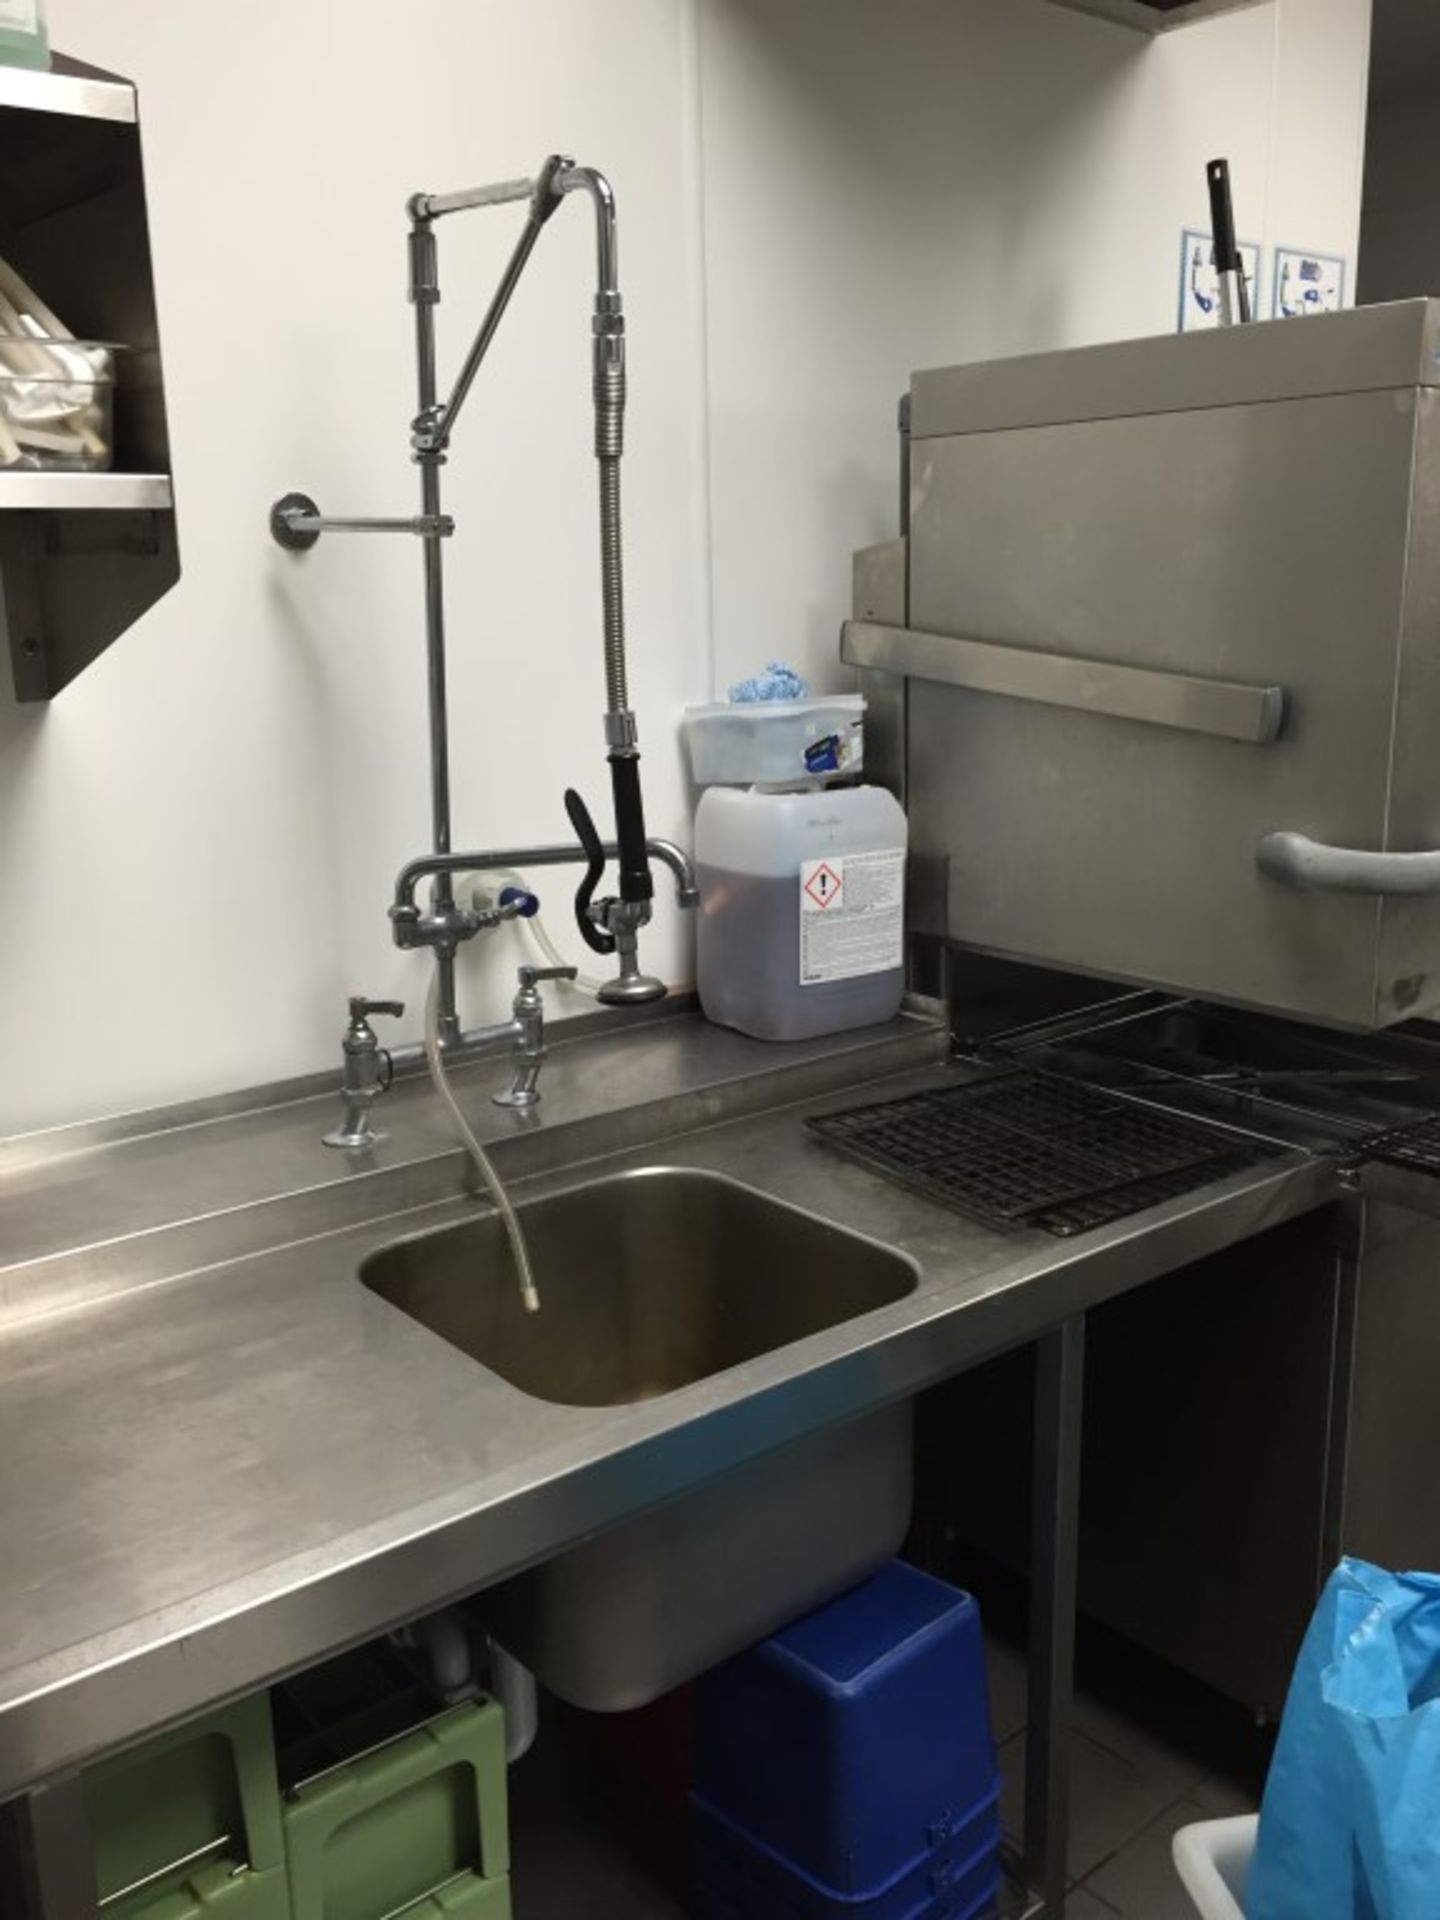 1 x Winterhalter GS502 Commercial Pass Through Dishwasher Station - Includes Stainless Steel Sink - Image 9 of 10